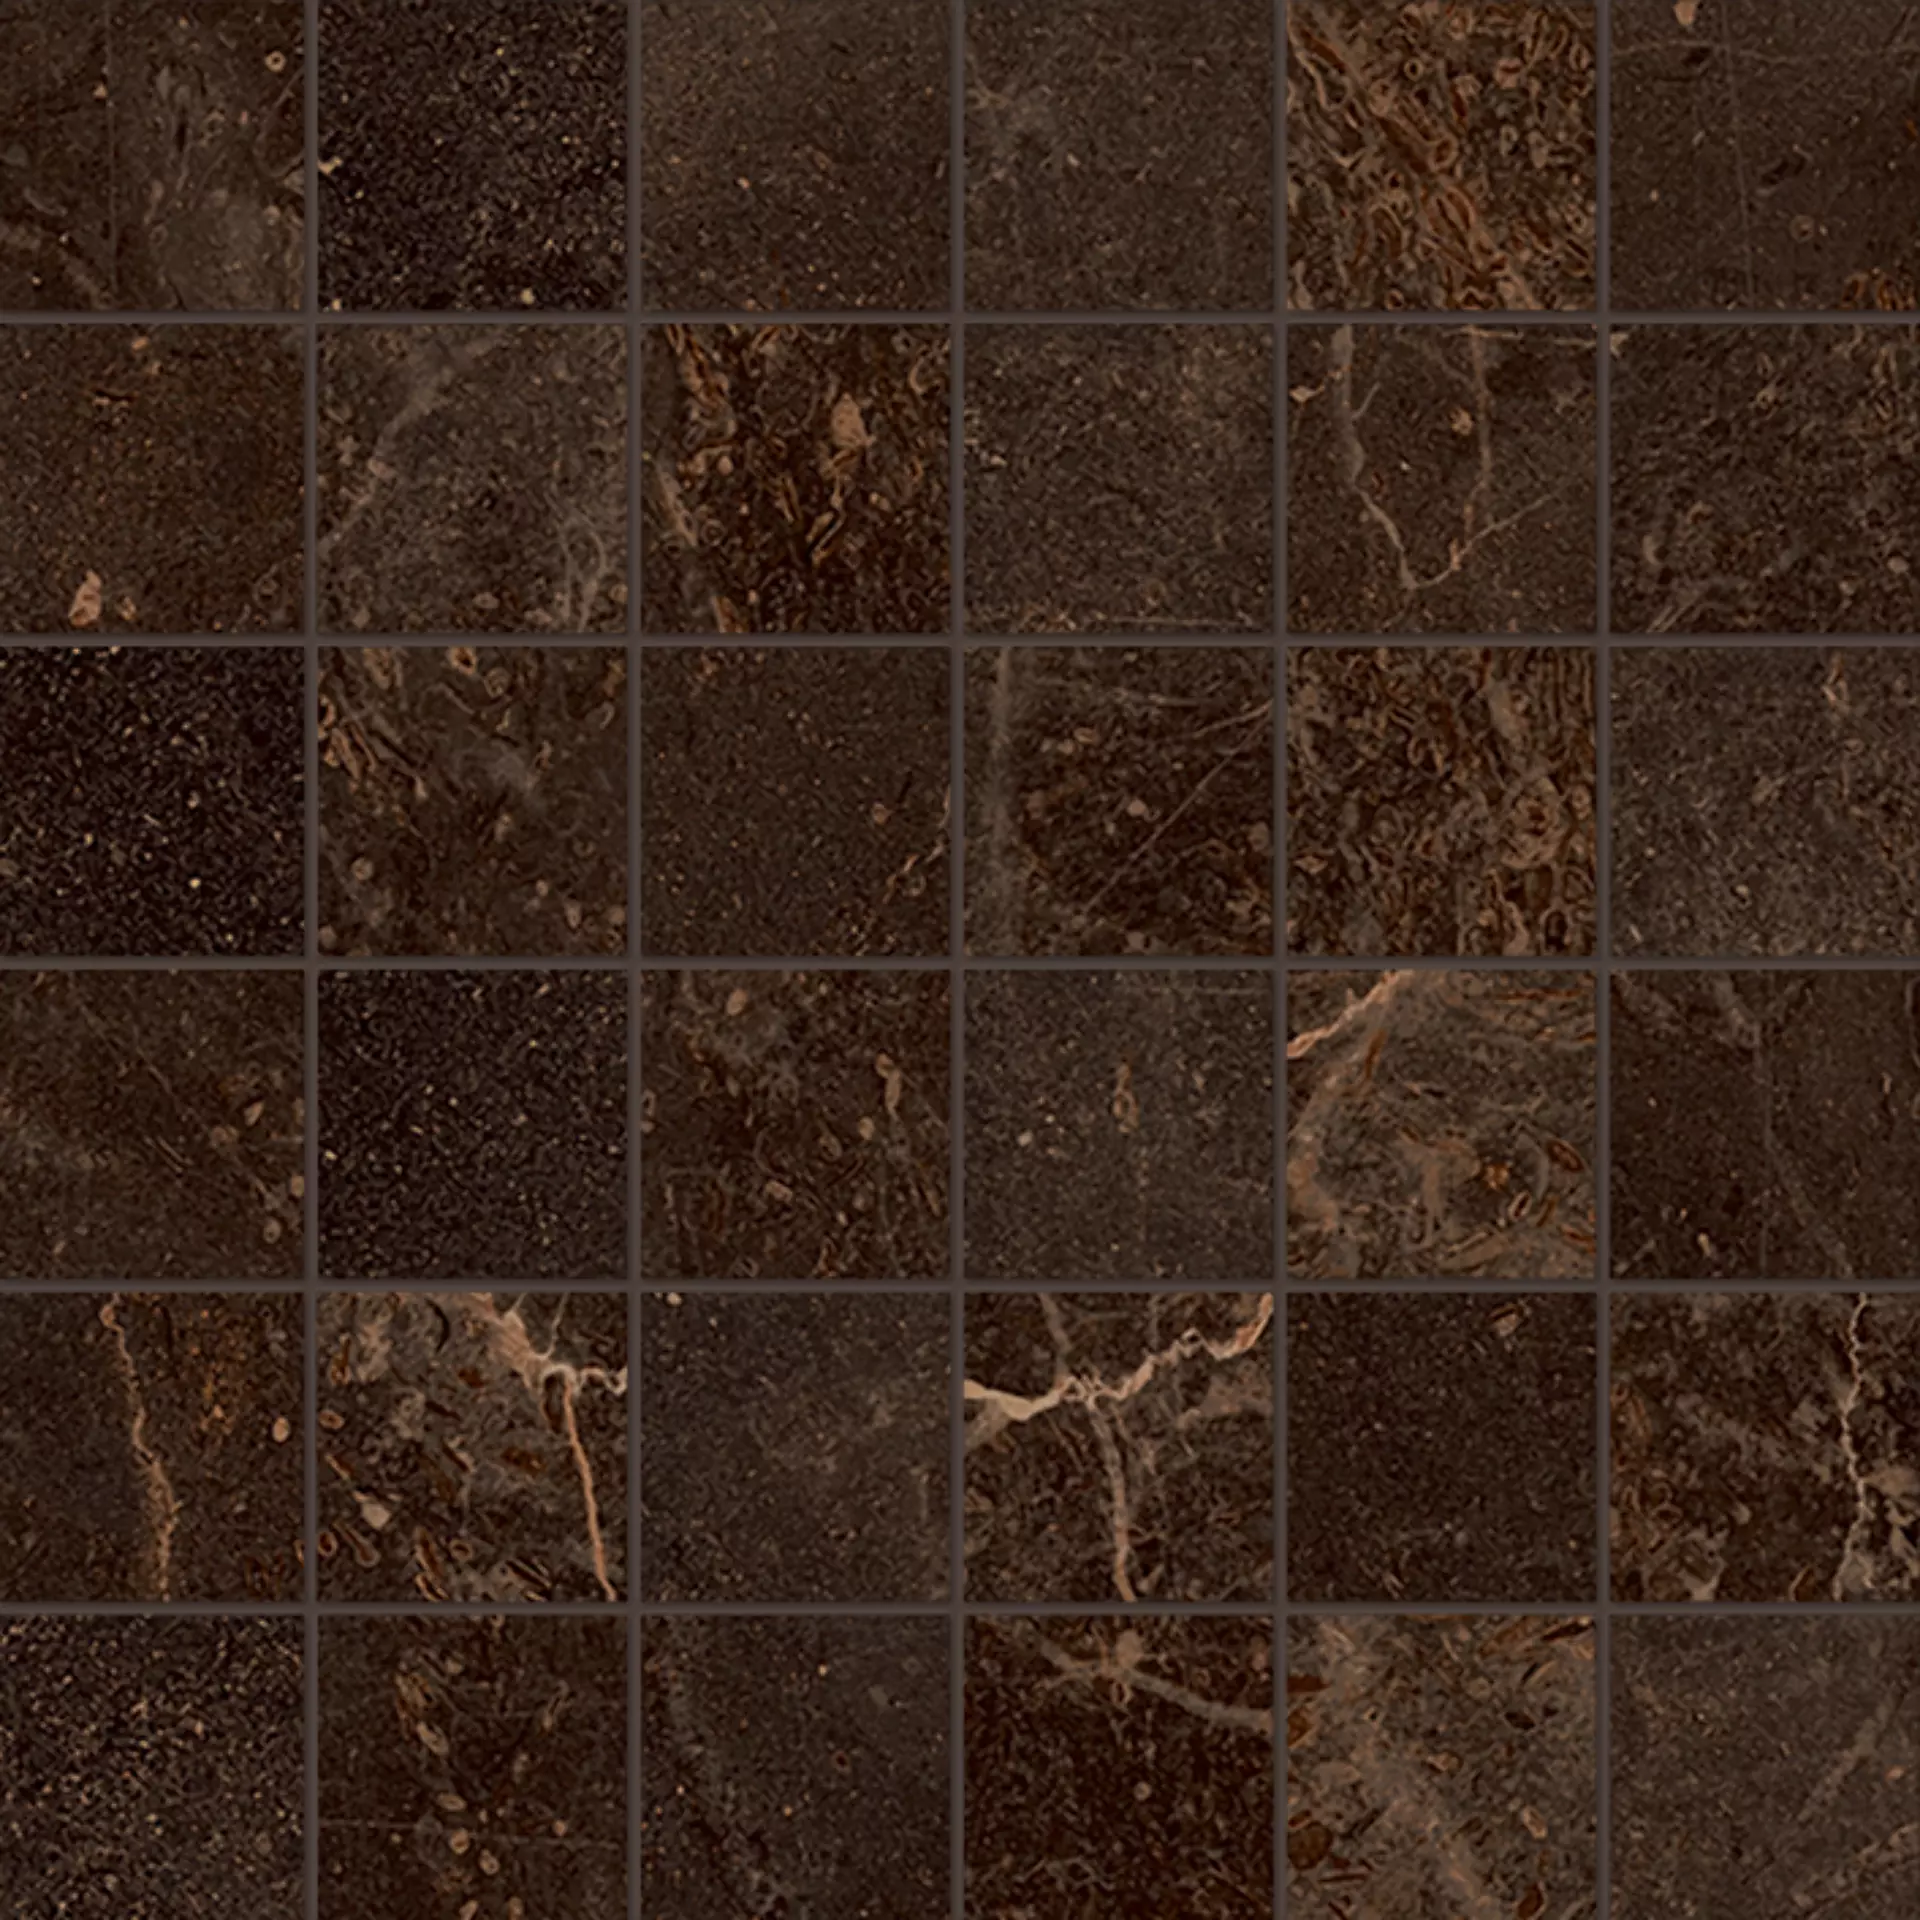 Fondovalle Planeto Jupiter Natural Mosaic 36 Pezzi PNT022A 30x30cm rectified 8,5mm